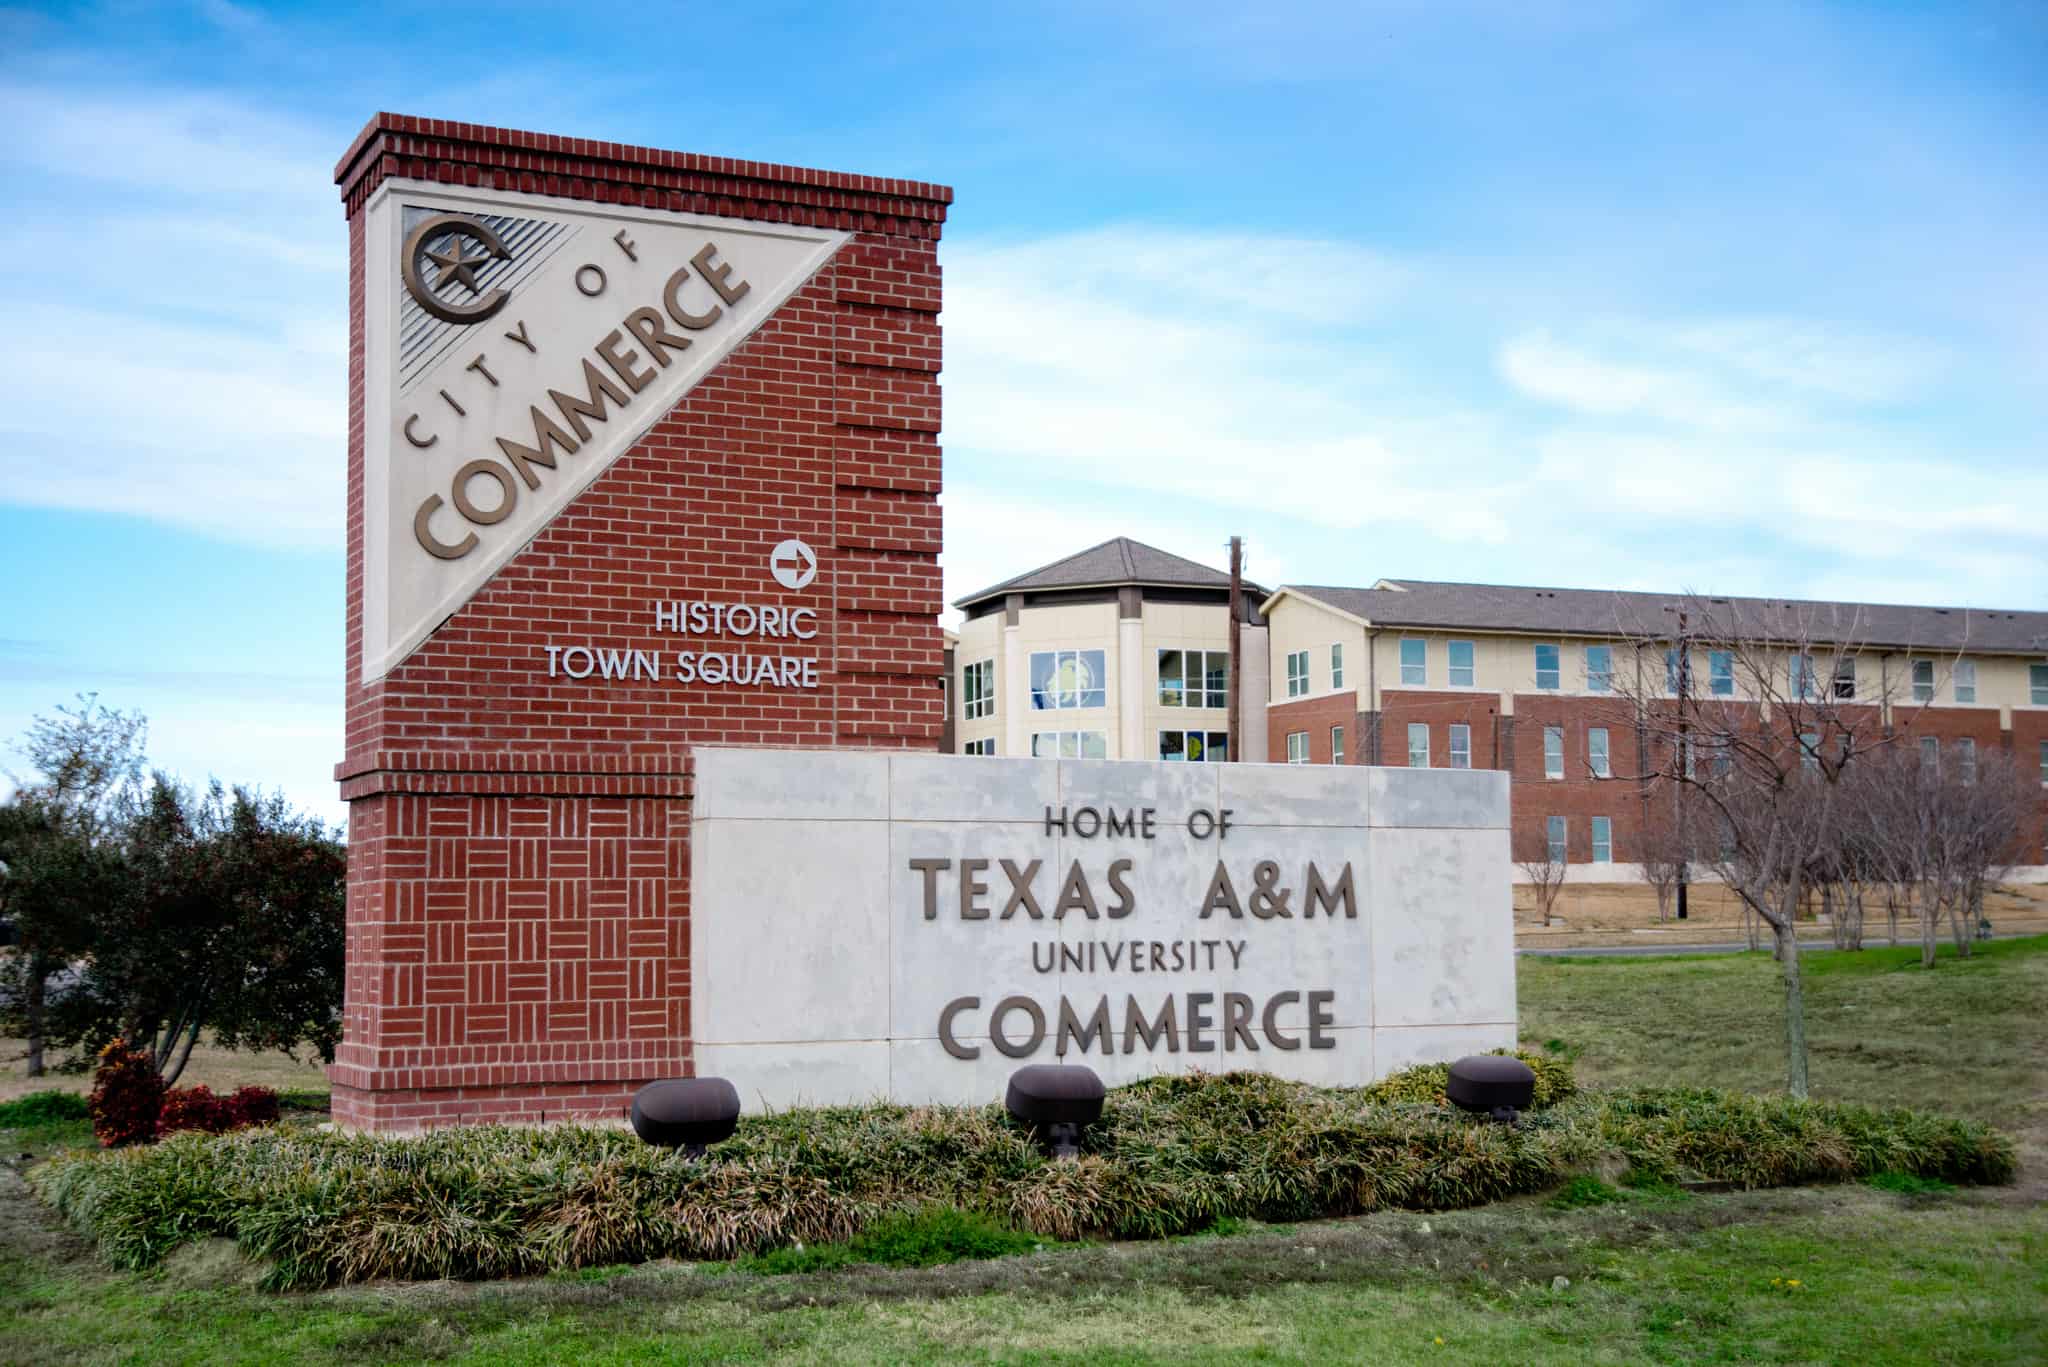 A&M-Commerce Named a 'Fastest-Growing College' | Texas A&M University